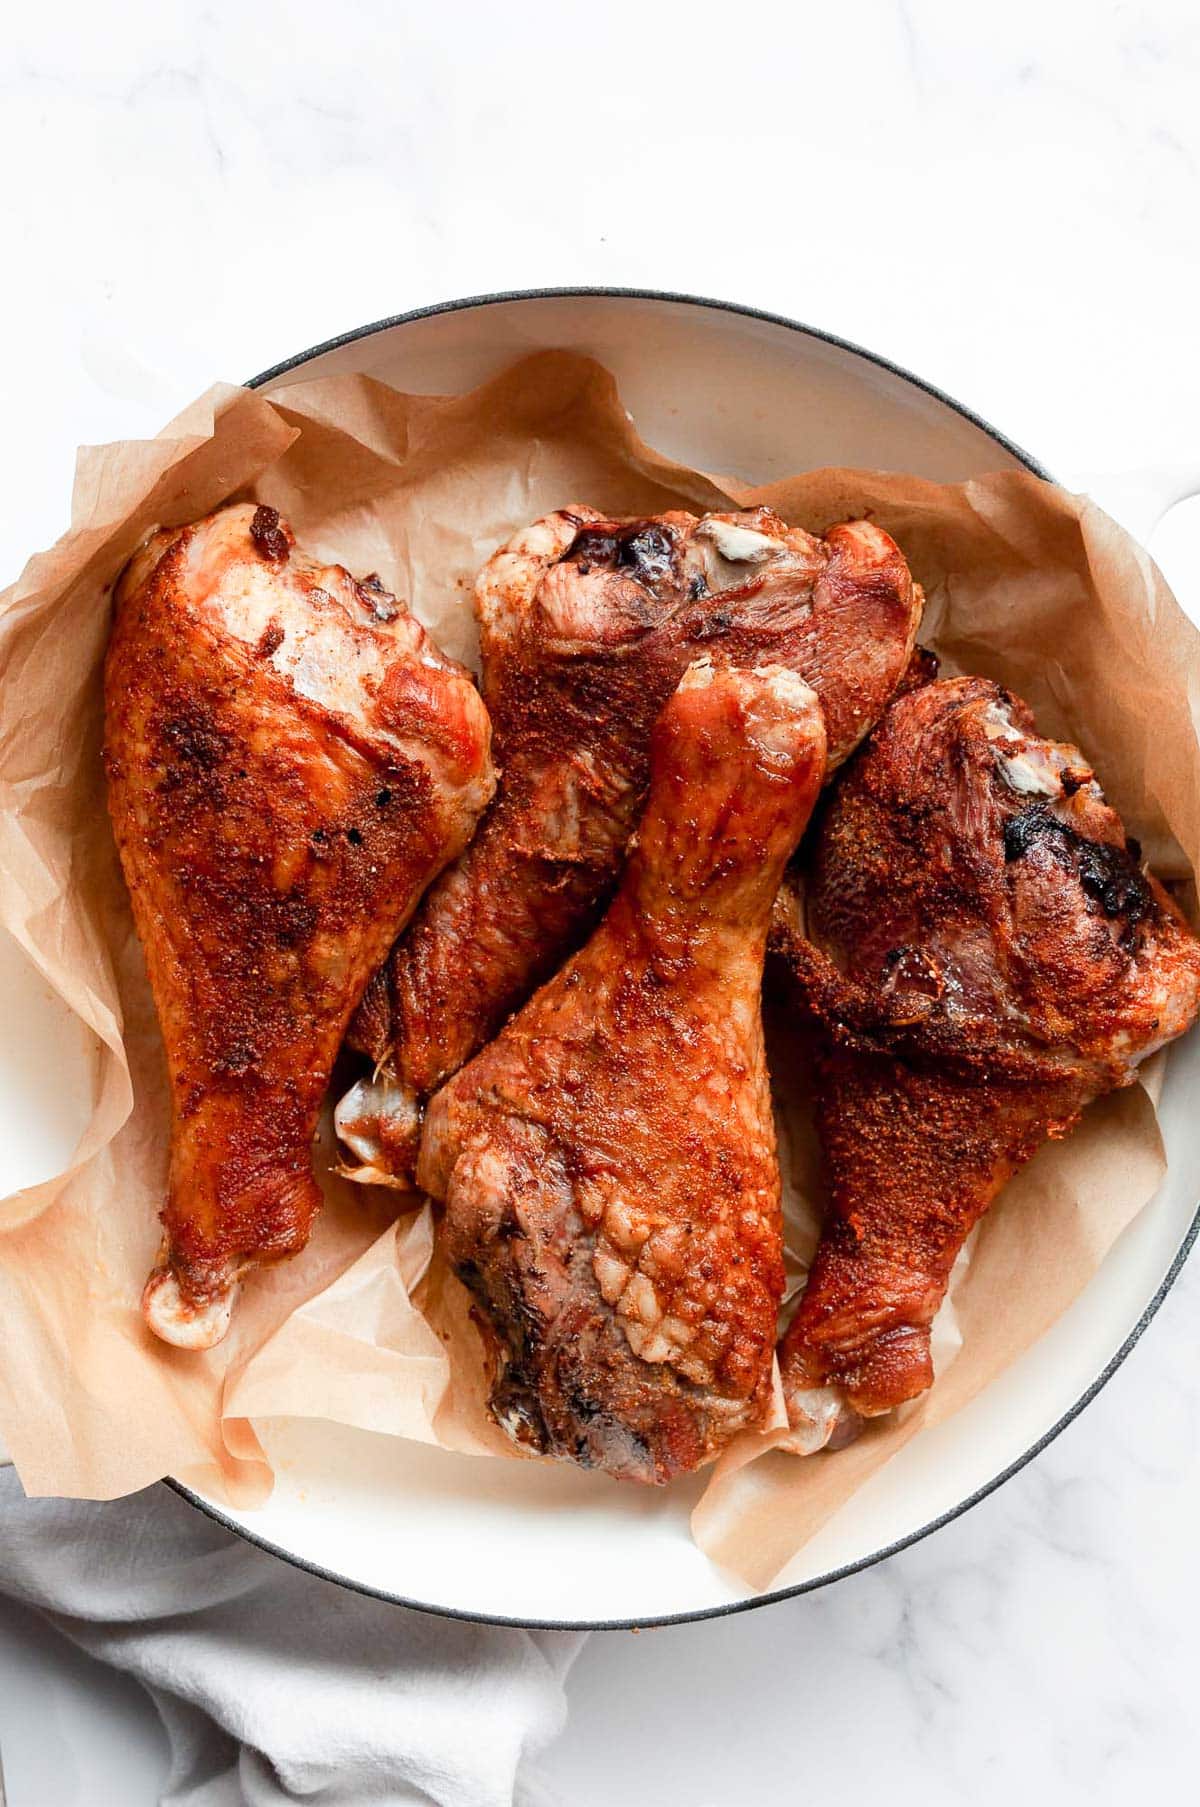 Four baked turkey legs on parchment paper in a serving dish.